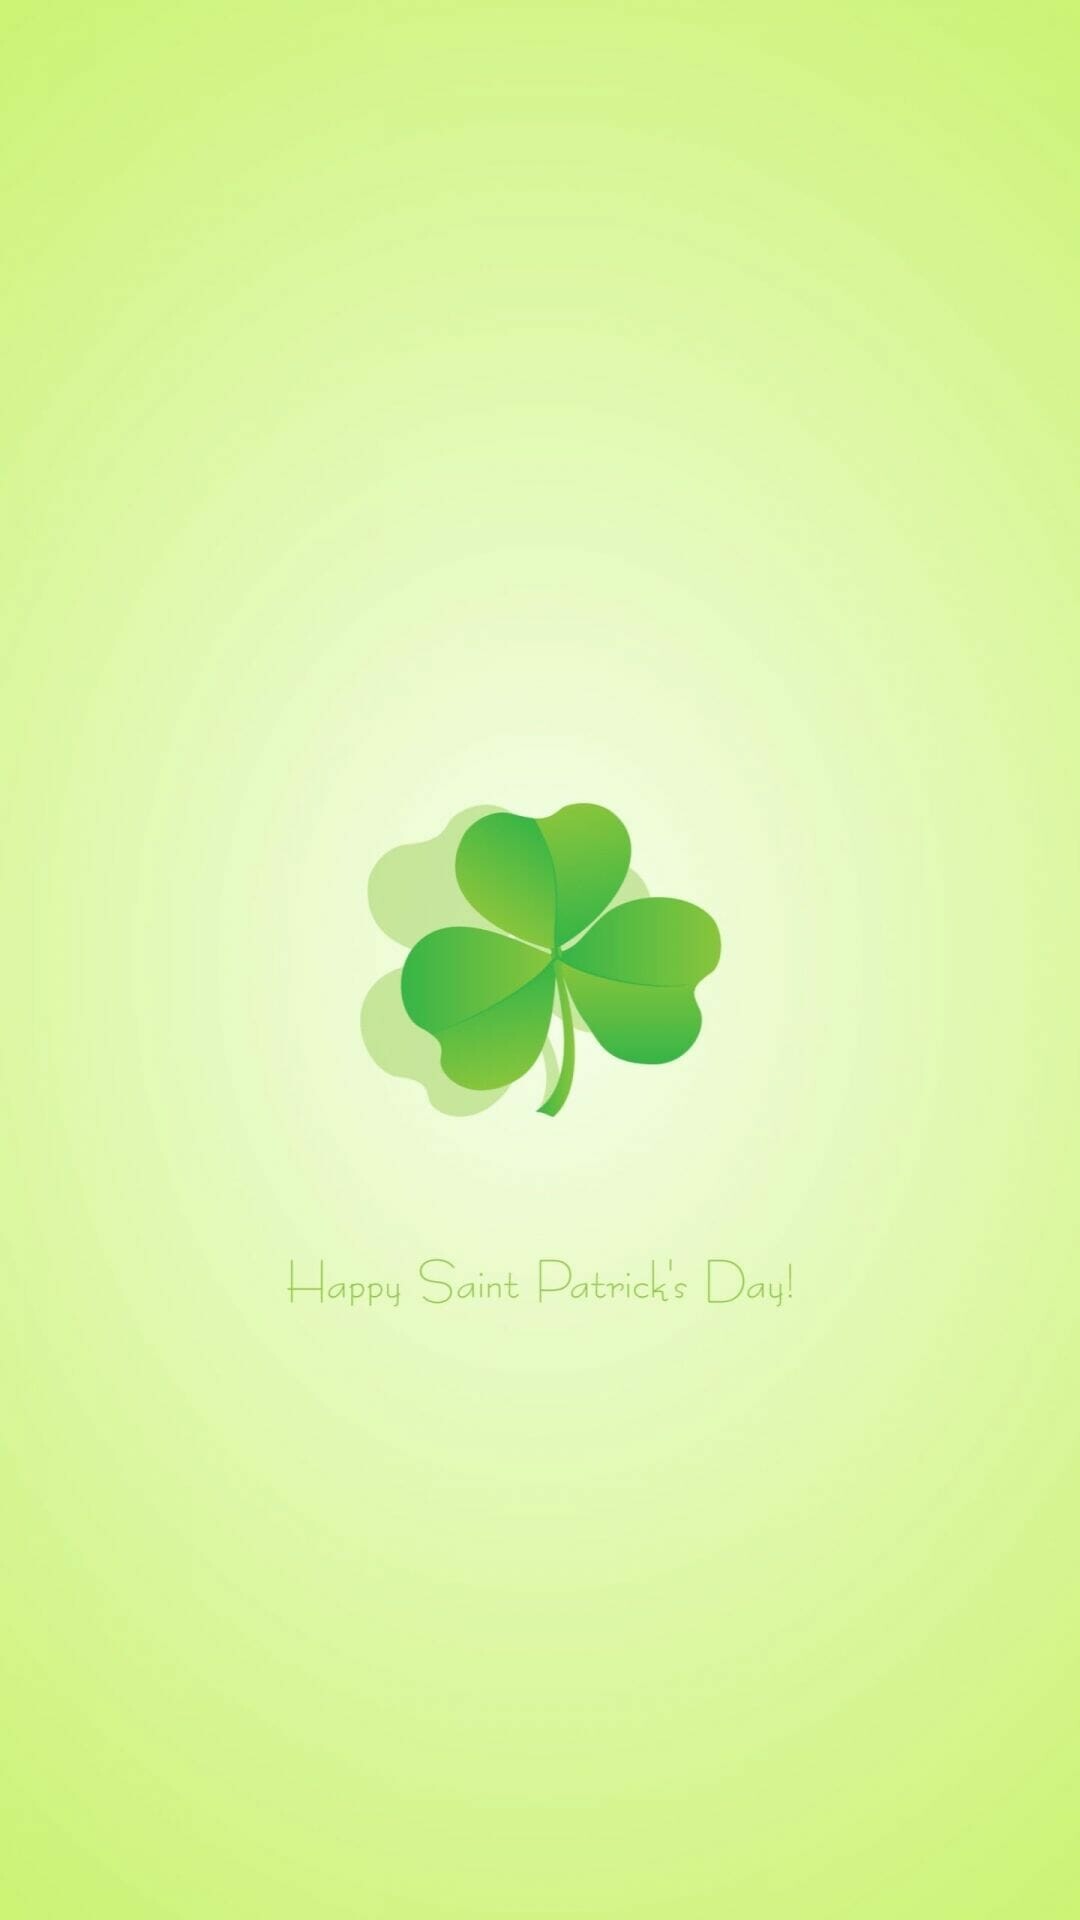 Saint Patrick's Day: An official public holiday in Ireland, Symbol, Clover. 1080x1920 Full HD Wallpaper.